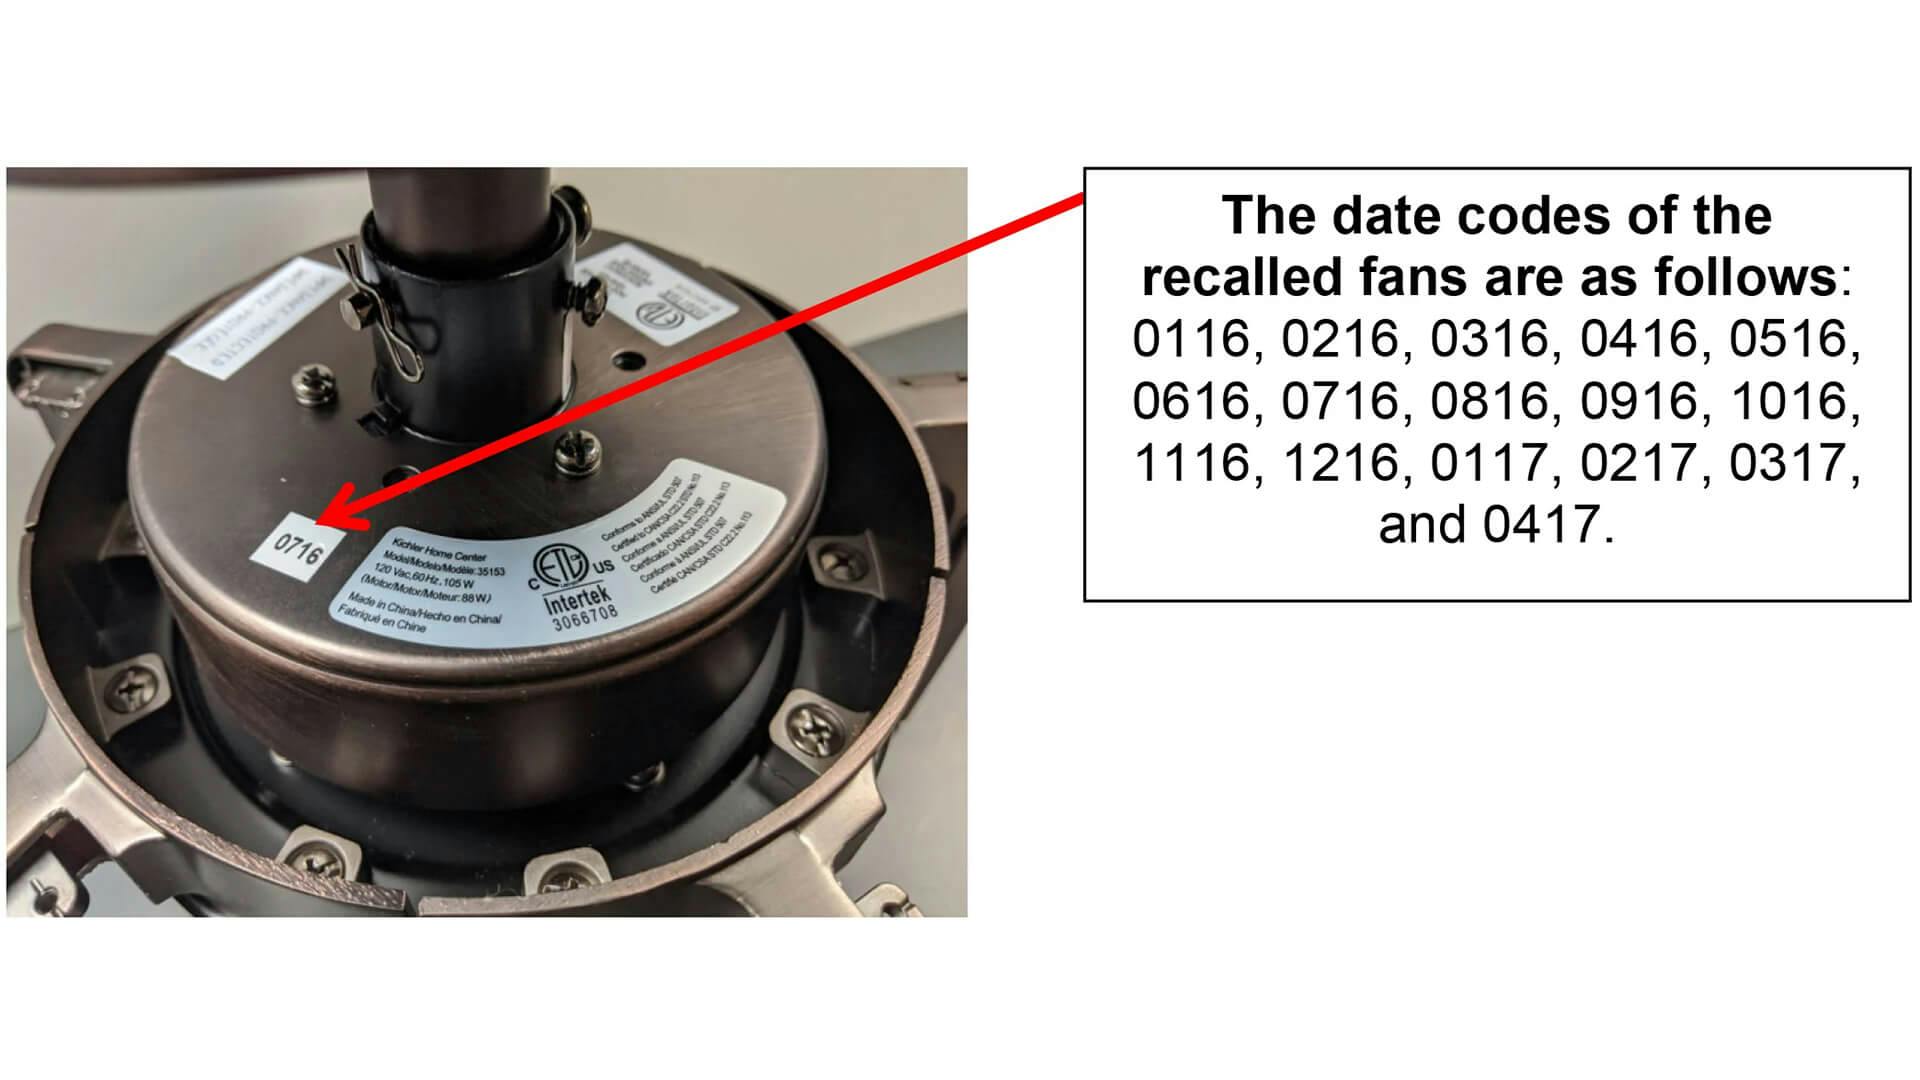 Image that shows the underneath of the 35153 ceiling fan with date codes.